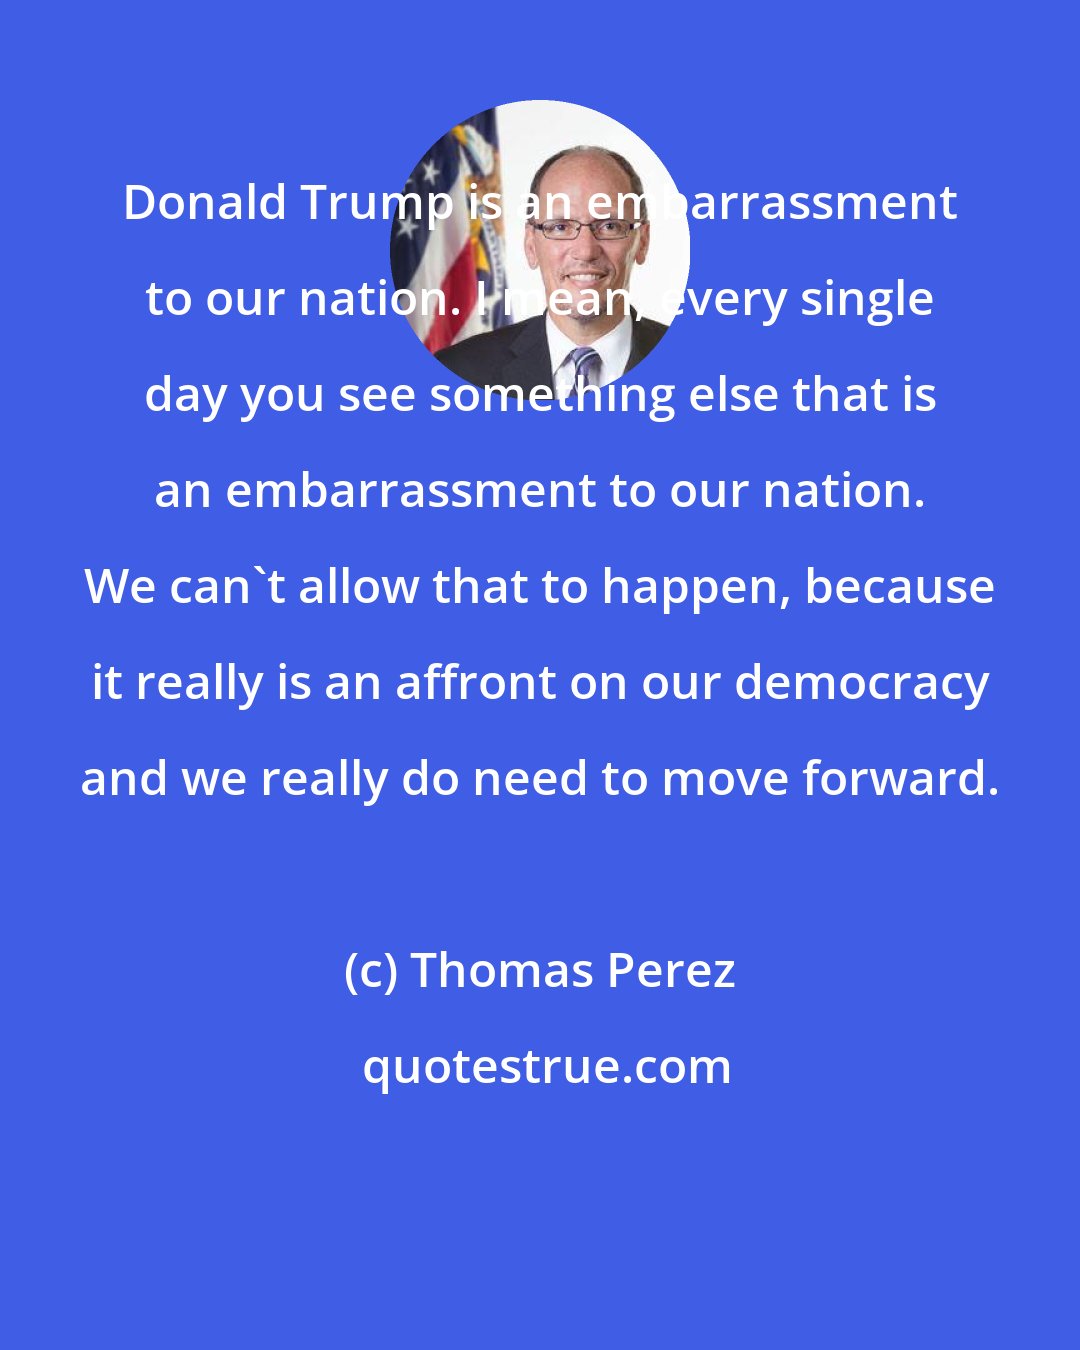 Thomas Perez: Donald Trump is an embarrassment to our nation. I mean, every single day you see something else that is an embarrassment to our nation. We can't allow that to happen, because it really is an affront on our democracy and we really do need to move forward.